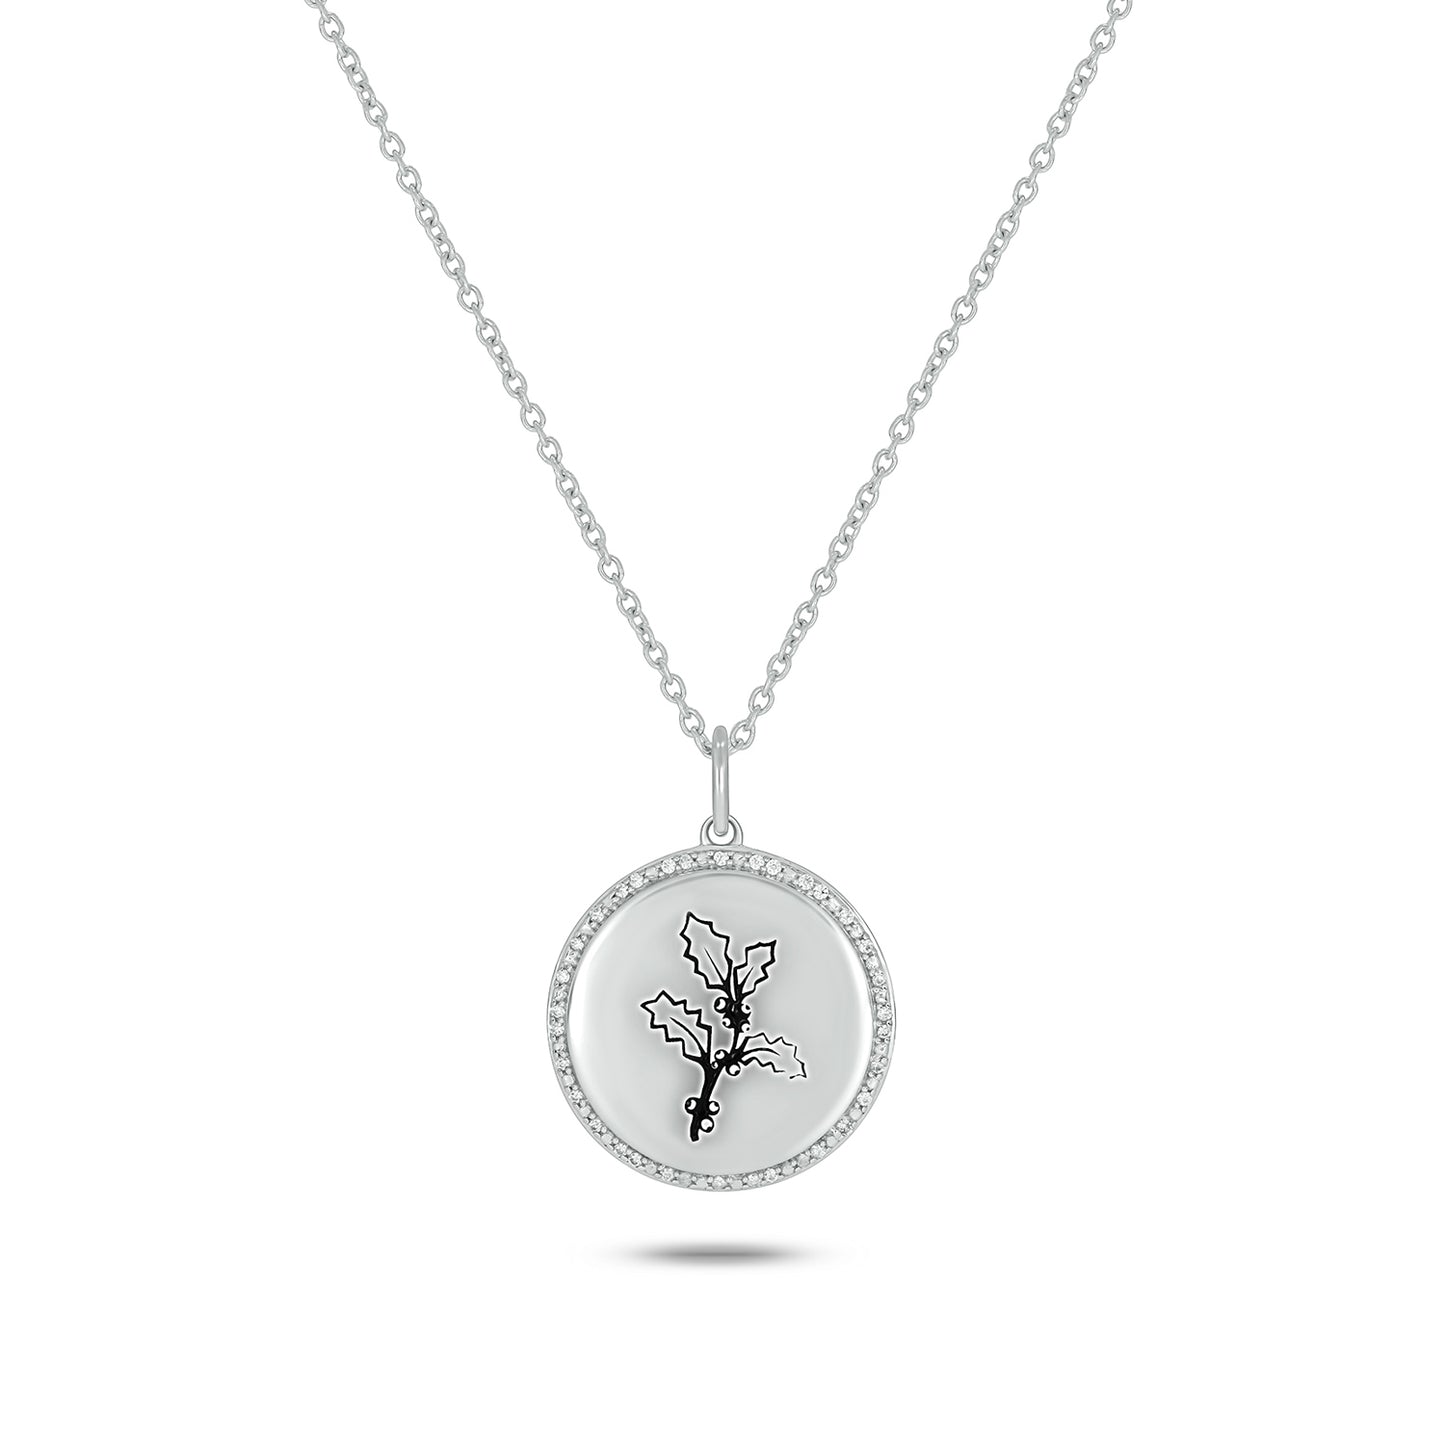 Bespoke Personalized Birth Flower Pendant In 925 Sterling Silver With Natural Diamonds